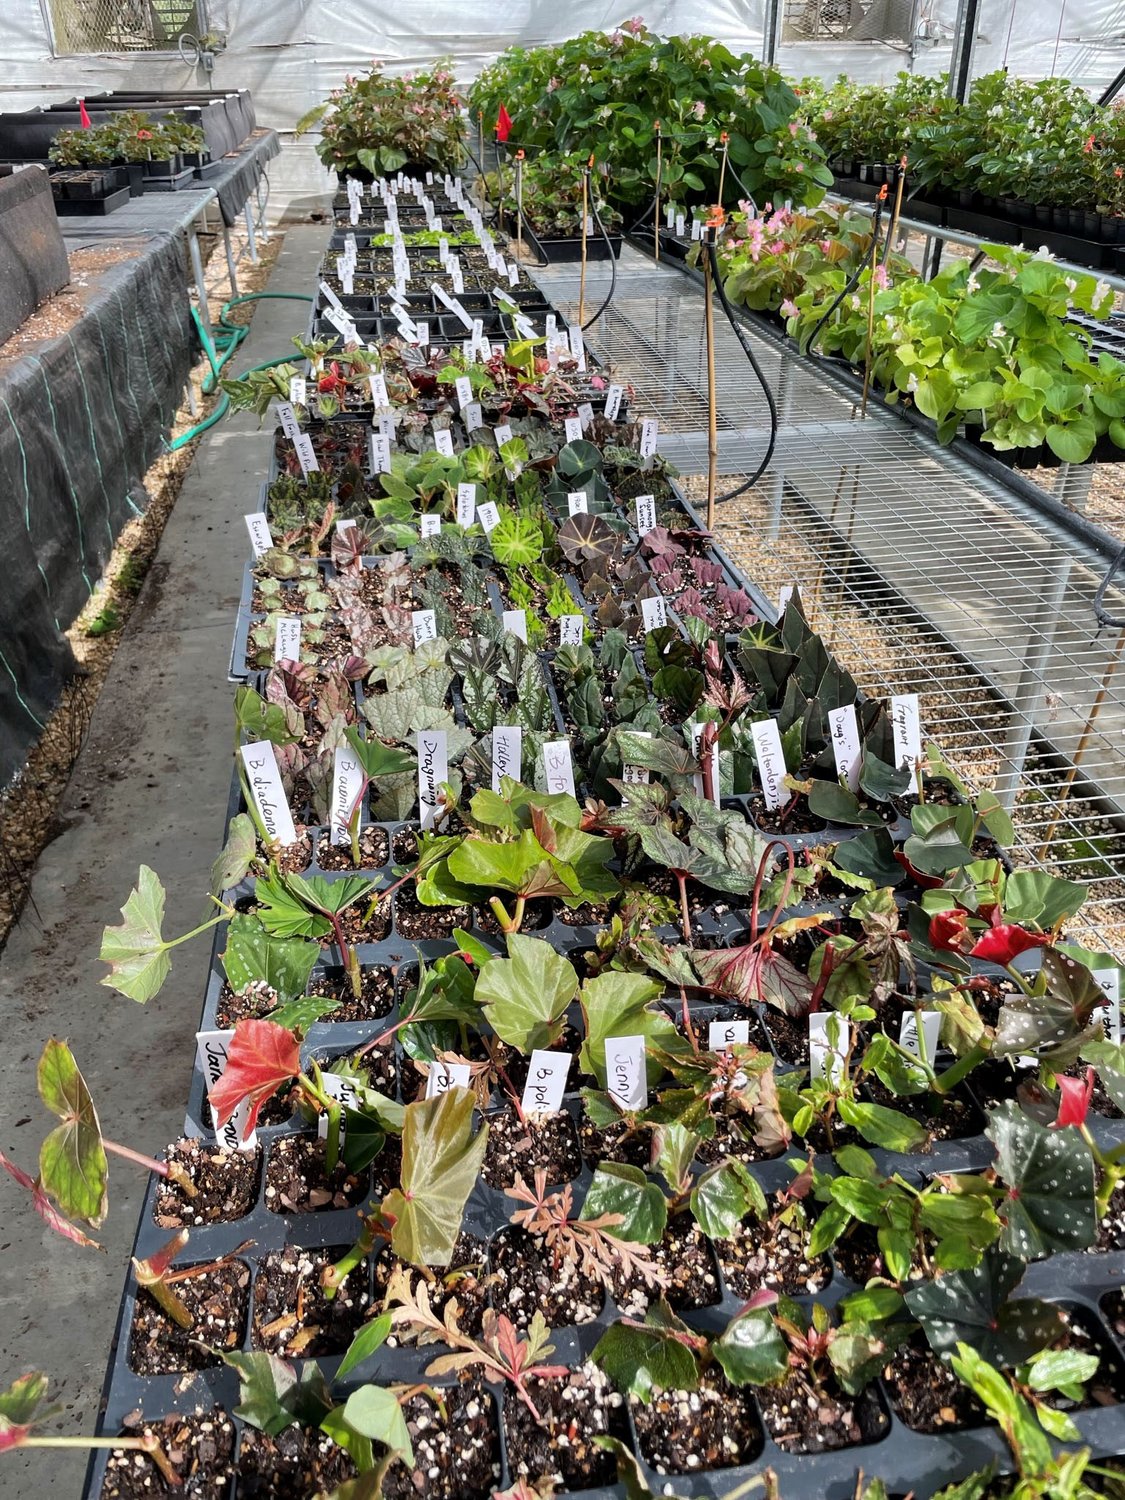 Heat and humidity are the two major factors that put stress on begonias. Even if growers use shade and electric cooling to combat heat stress, the plant’s stress response to heat limits its marketability in the landscape.